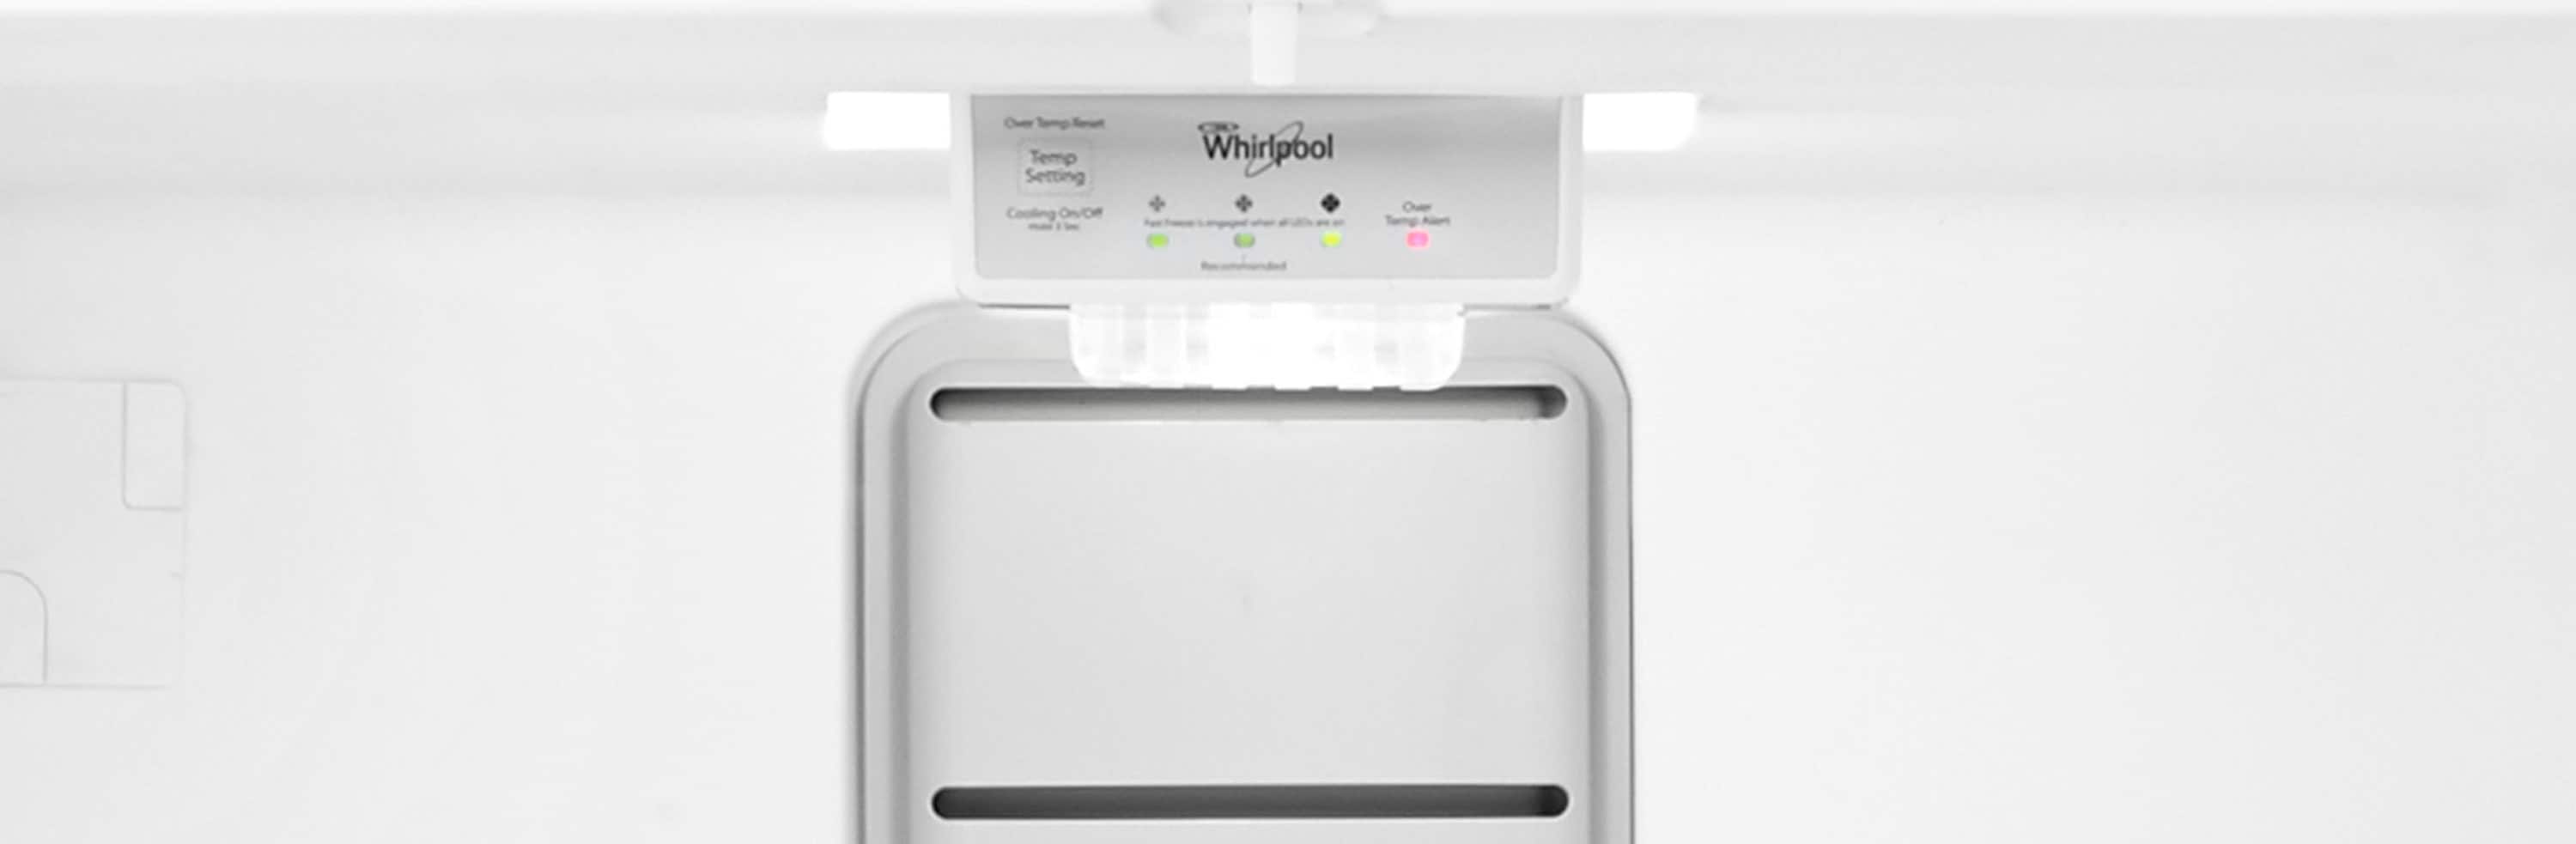 WZF79R20DW by Whirlpool - 20 cu. ft. Upright Freezer with Temperature Alarm